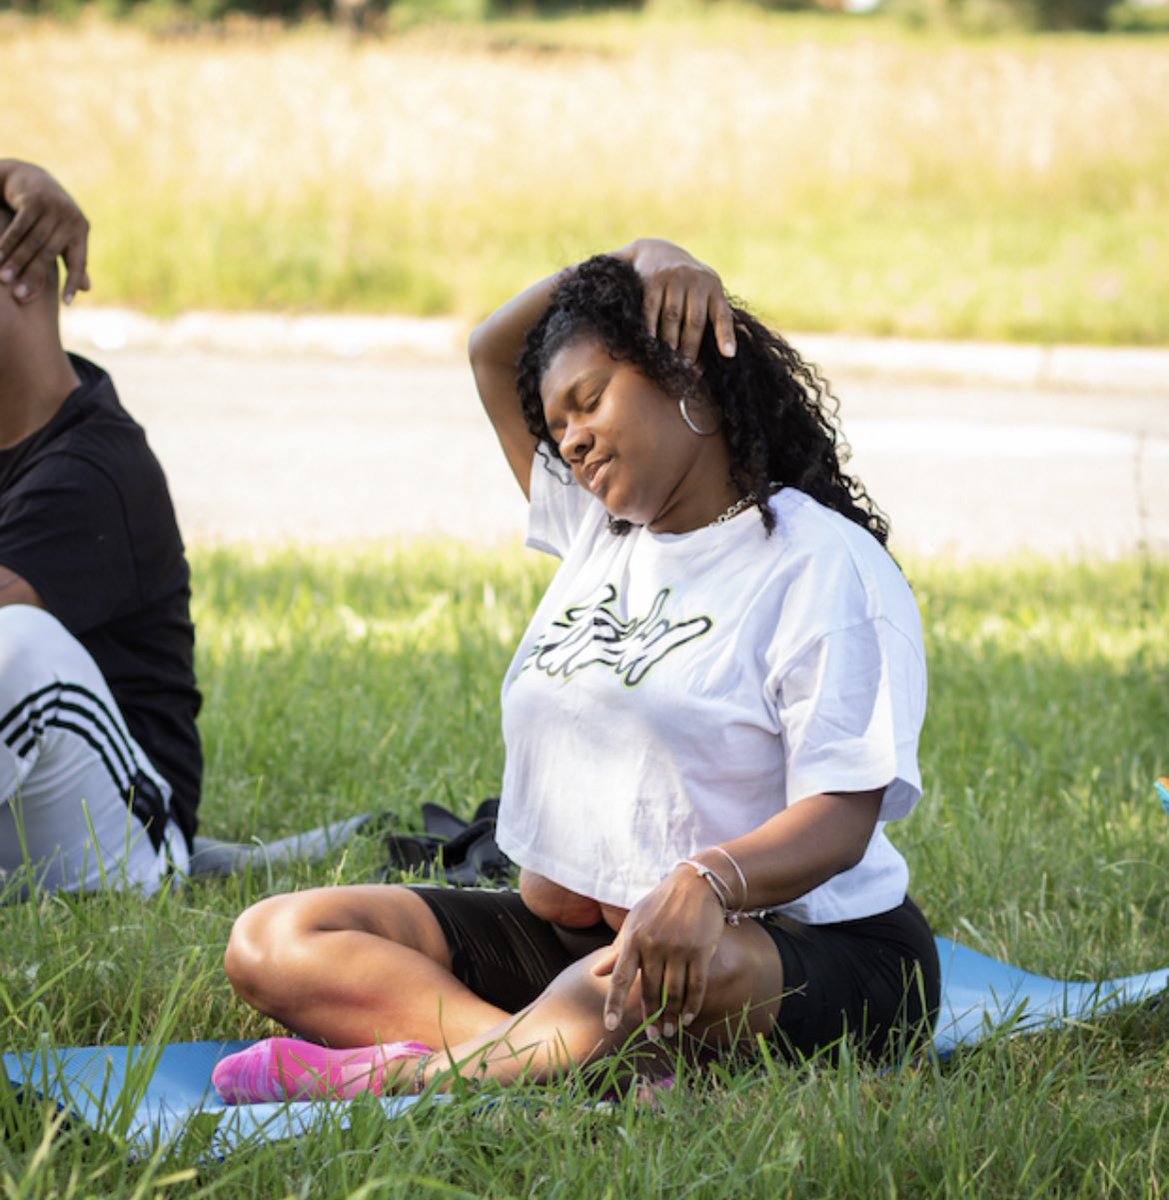 Reminder: 
 
•There IS class at Chandler Park at 11:00am! 

•It’s a beautiful day to slow down and reconnect with yourSELF  
 
#selfcare 
#CommunityCare 
#CommUNITYyoga